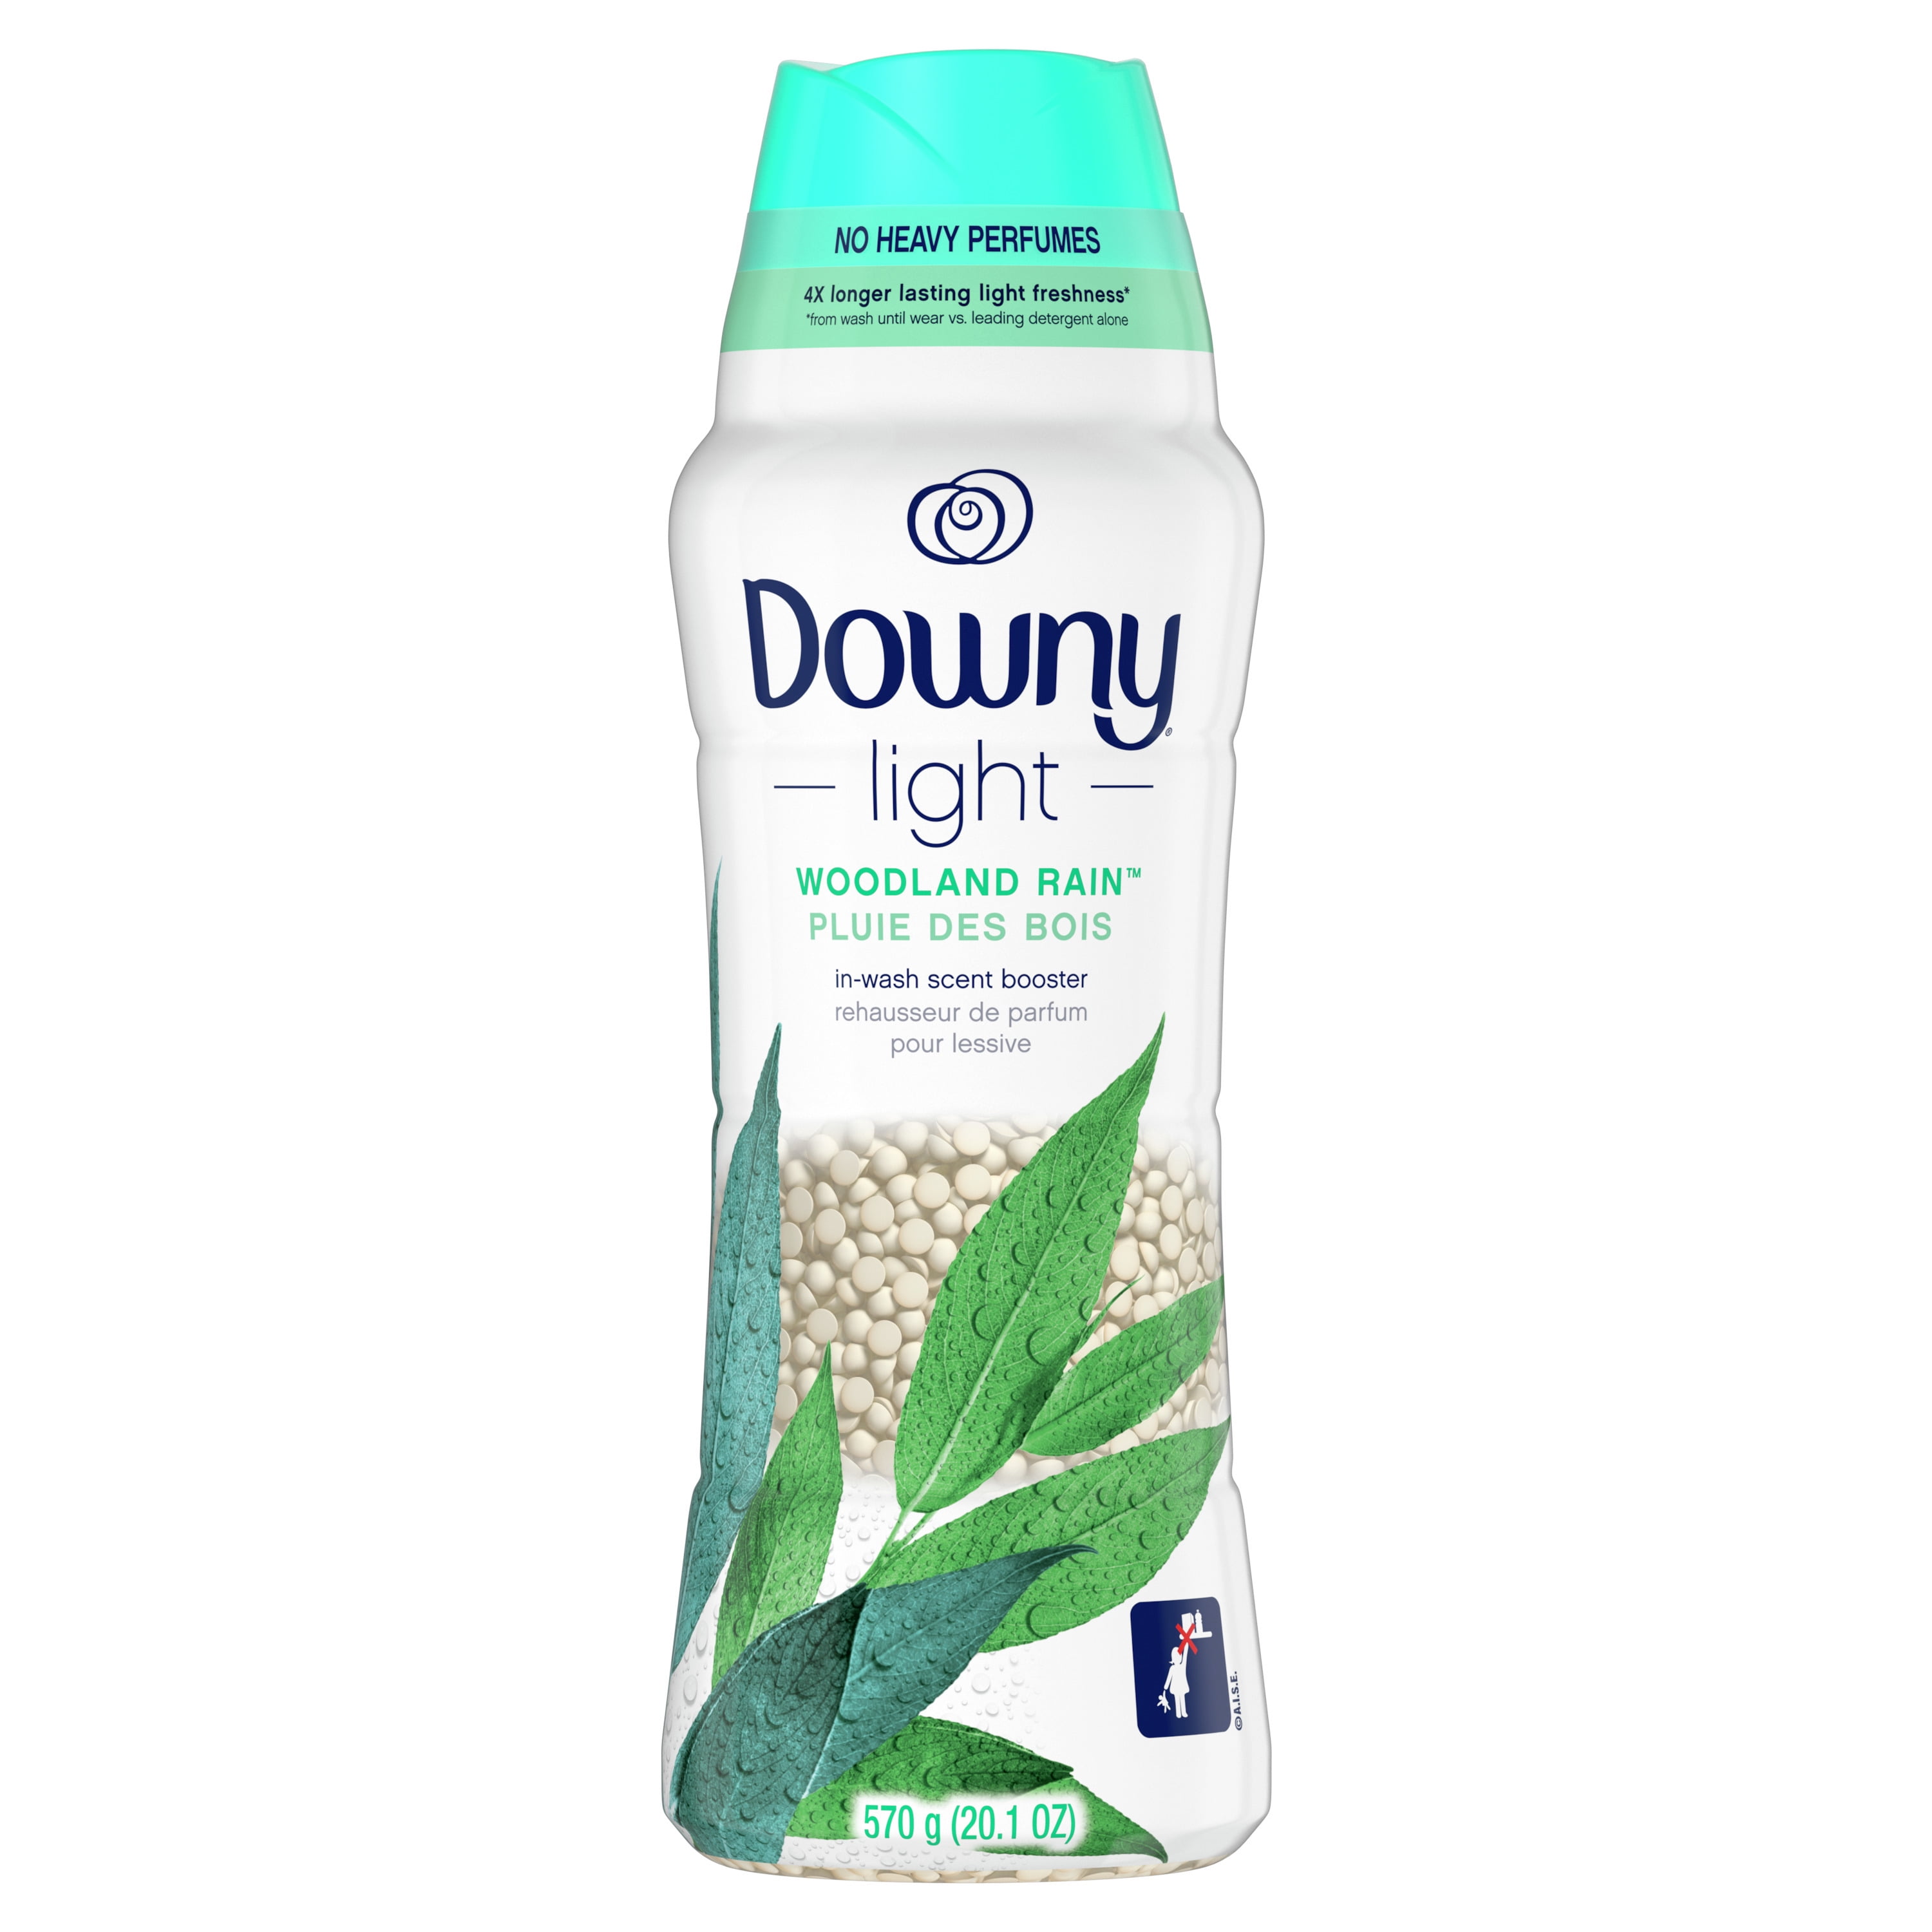 Downy Light Laundry Scent Booster Beads, Woodland Rain, 20.1 oz